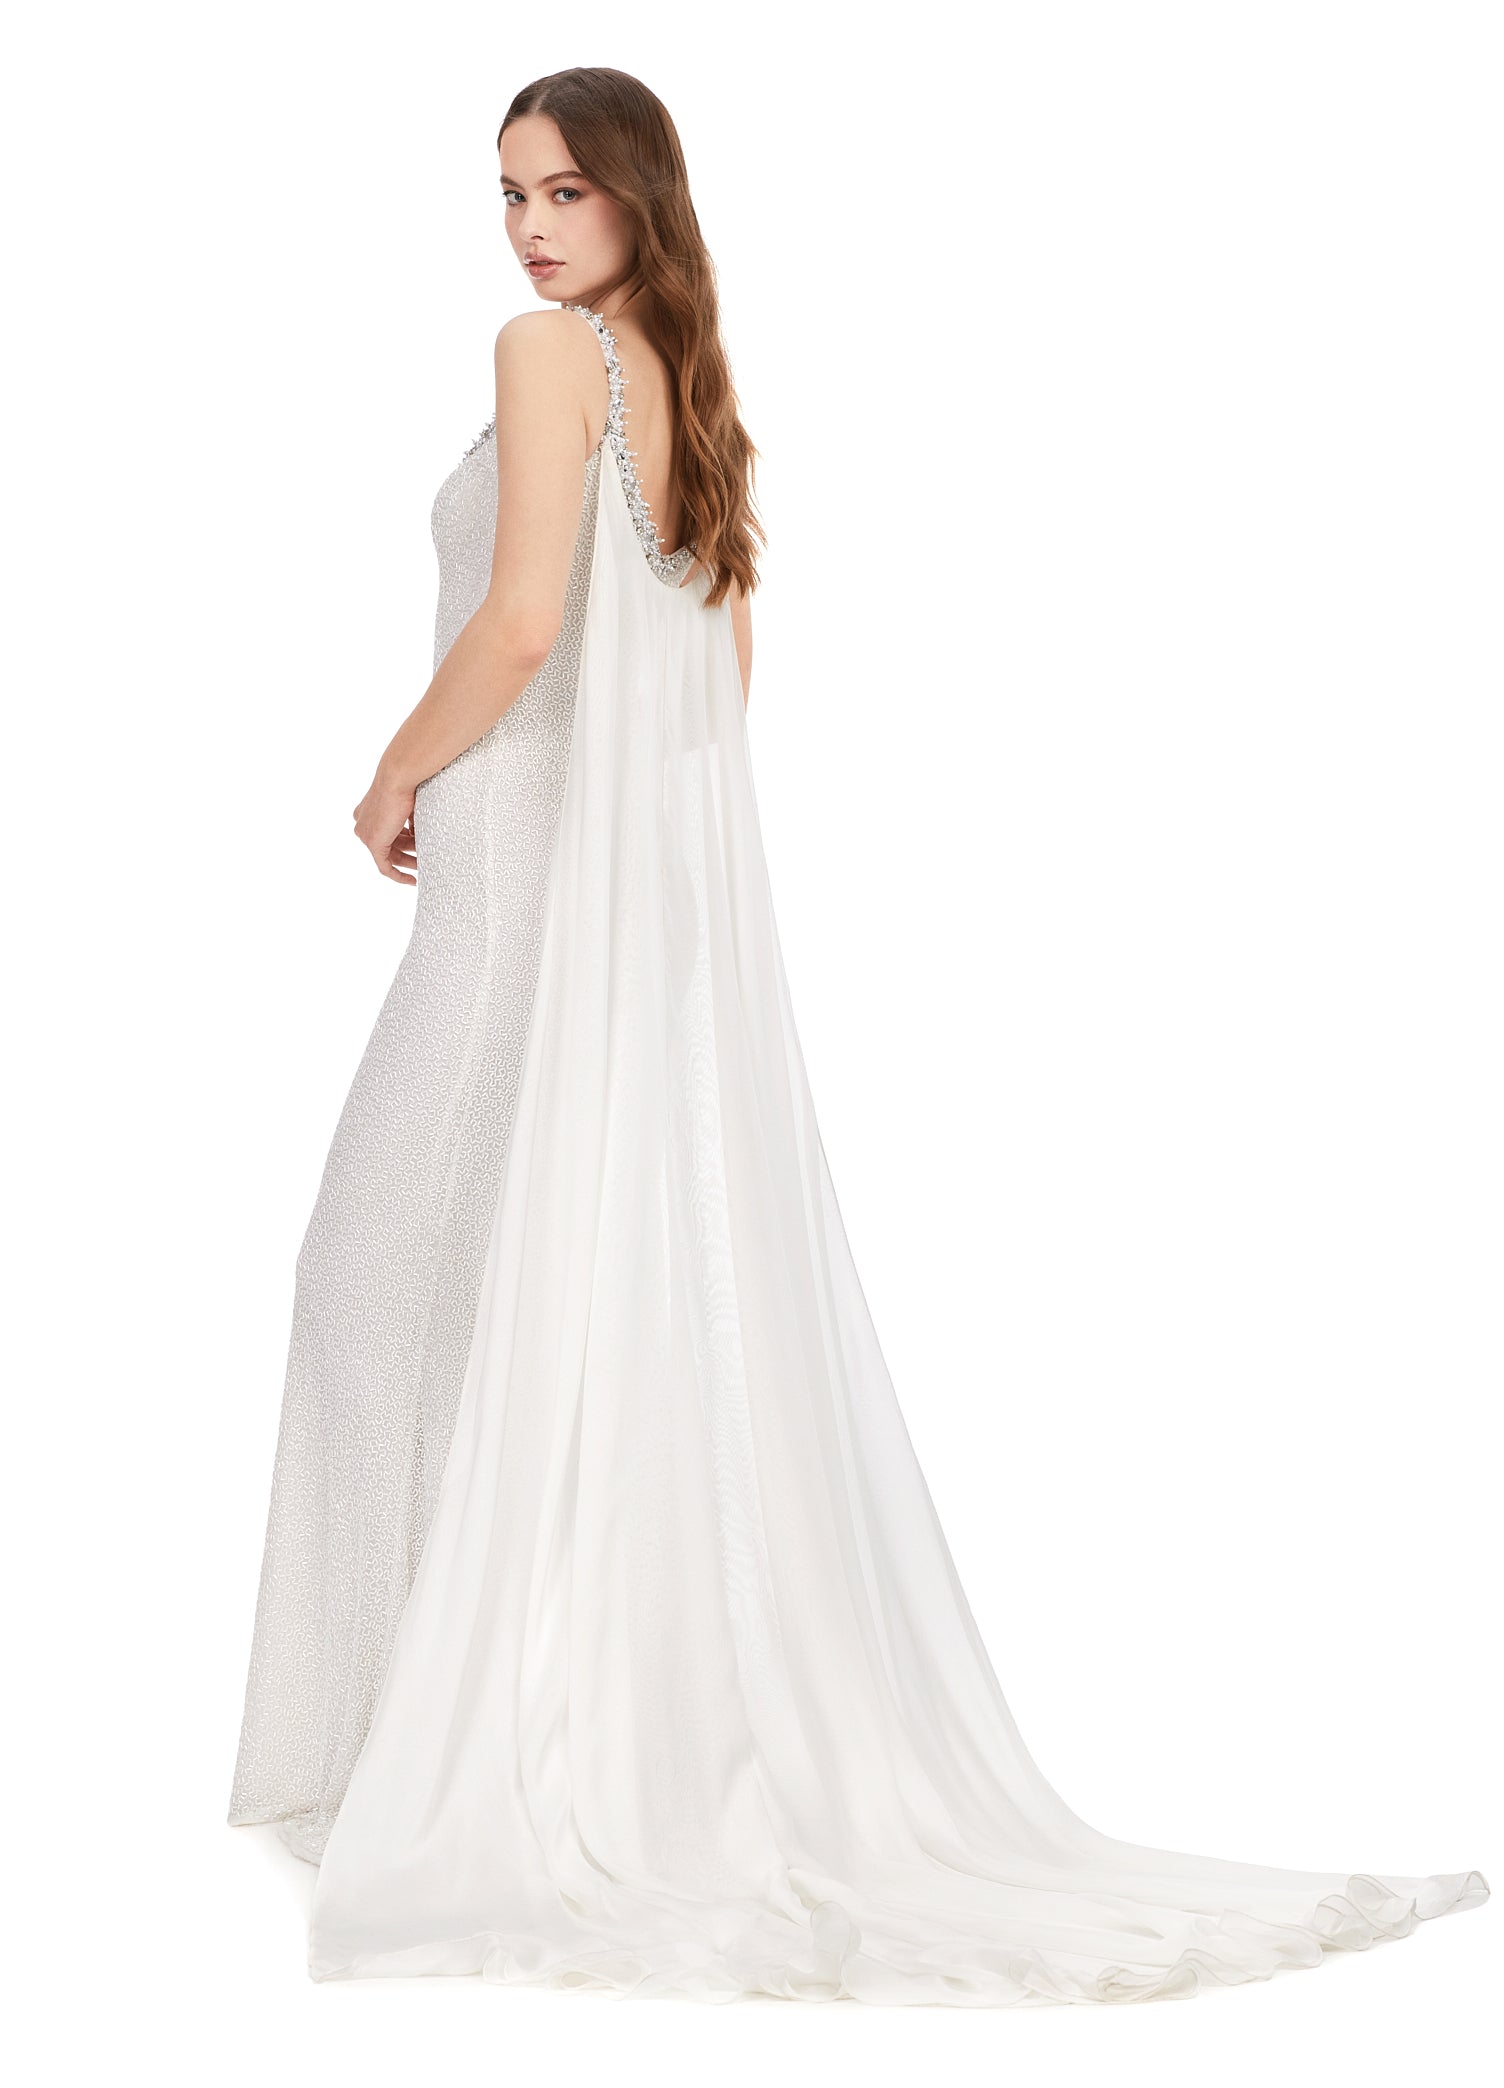 Ashley Lauren 11398 – Beaded Vermicelli Formals Slipper Chiffon Cape Glass Gown Crystal with D